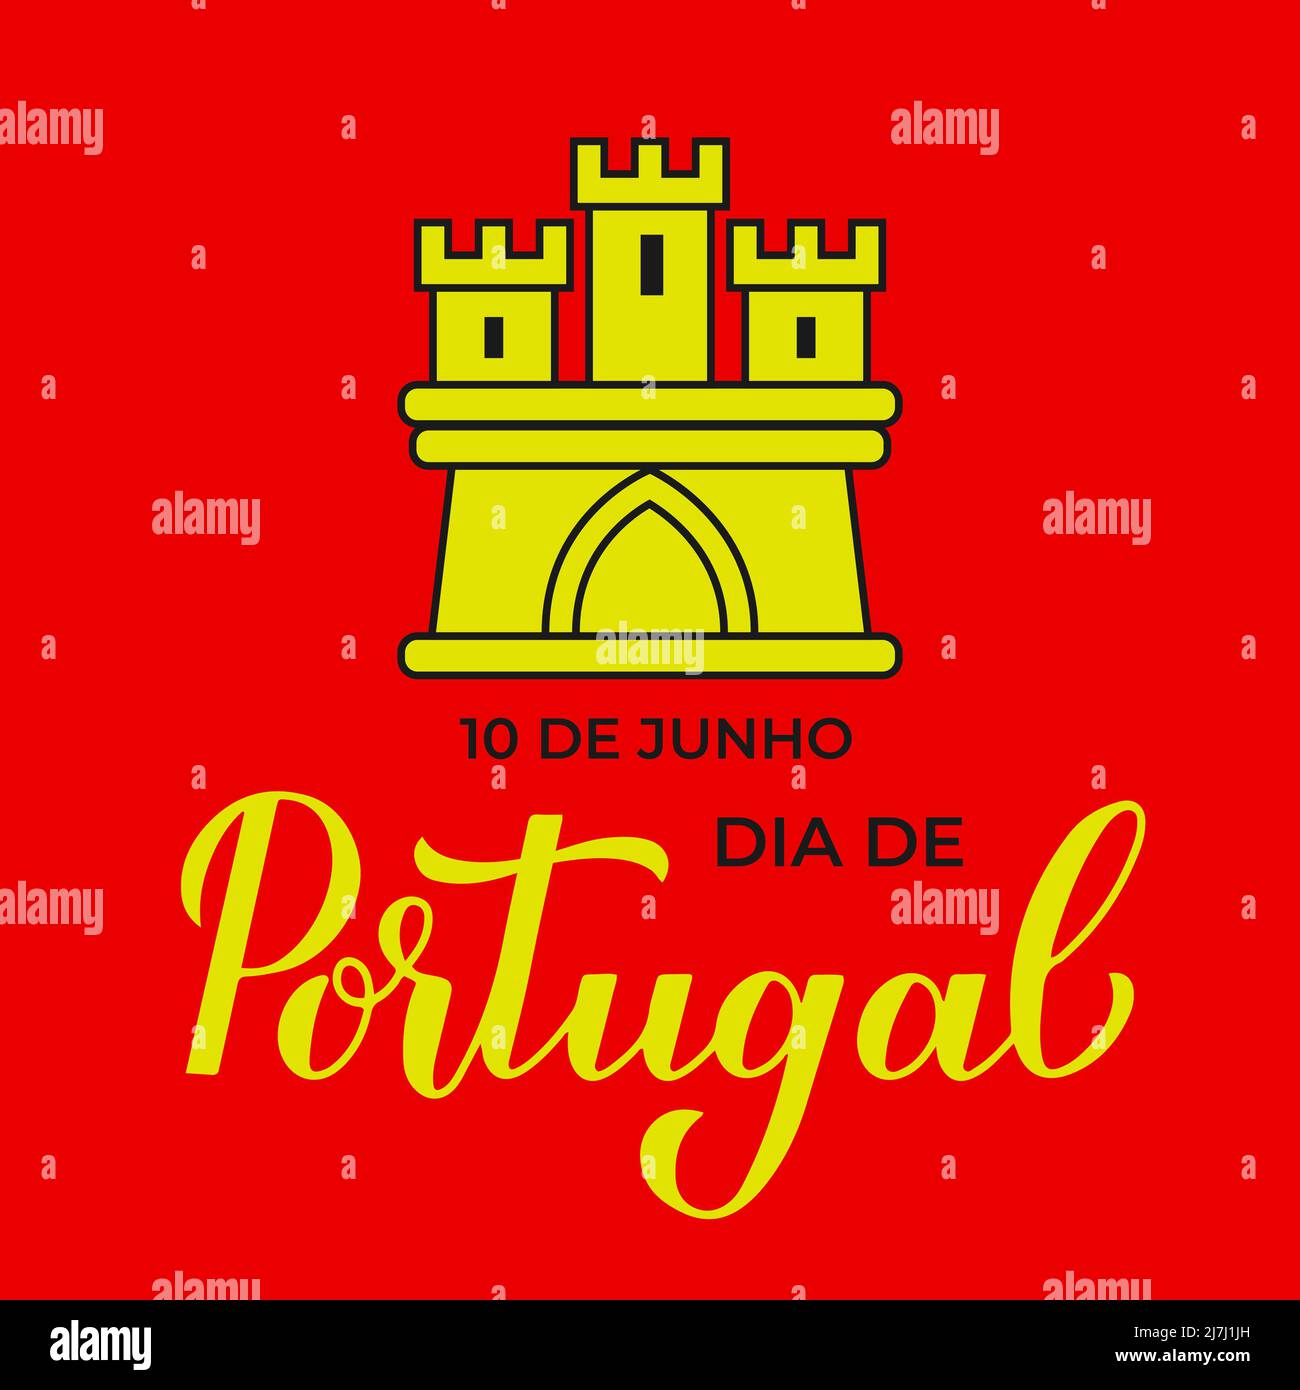 Portugal National Day typography poster in Portuguese. Holiday celebration on June 10. Vector template for banner, flyer, postcard, etc. Stock Vector